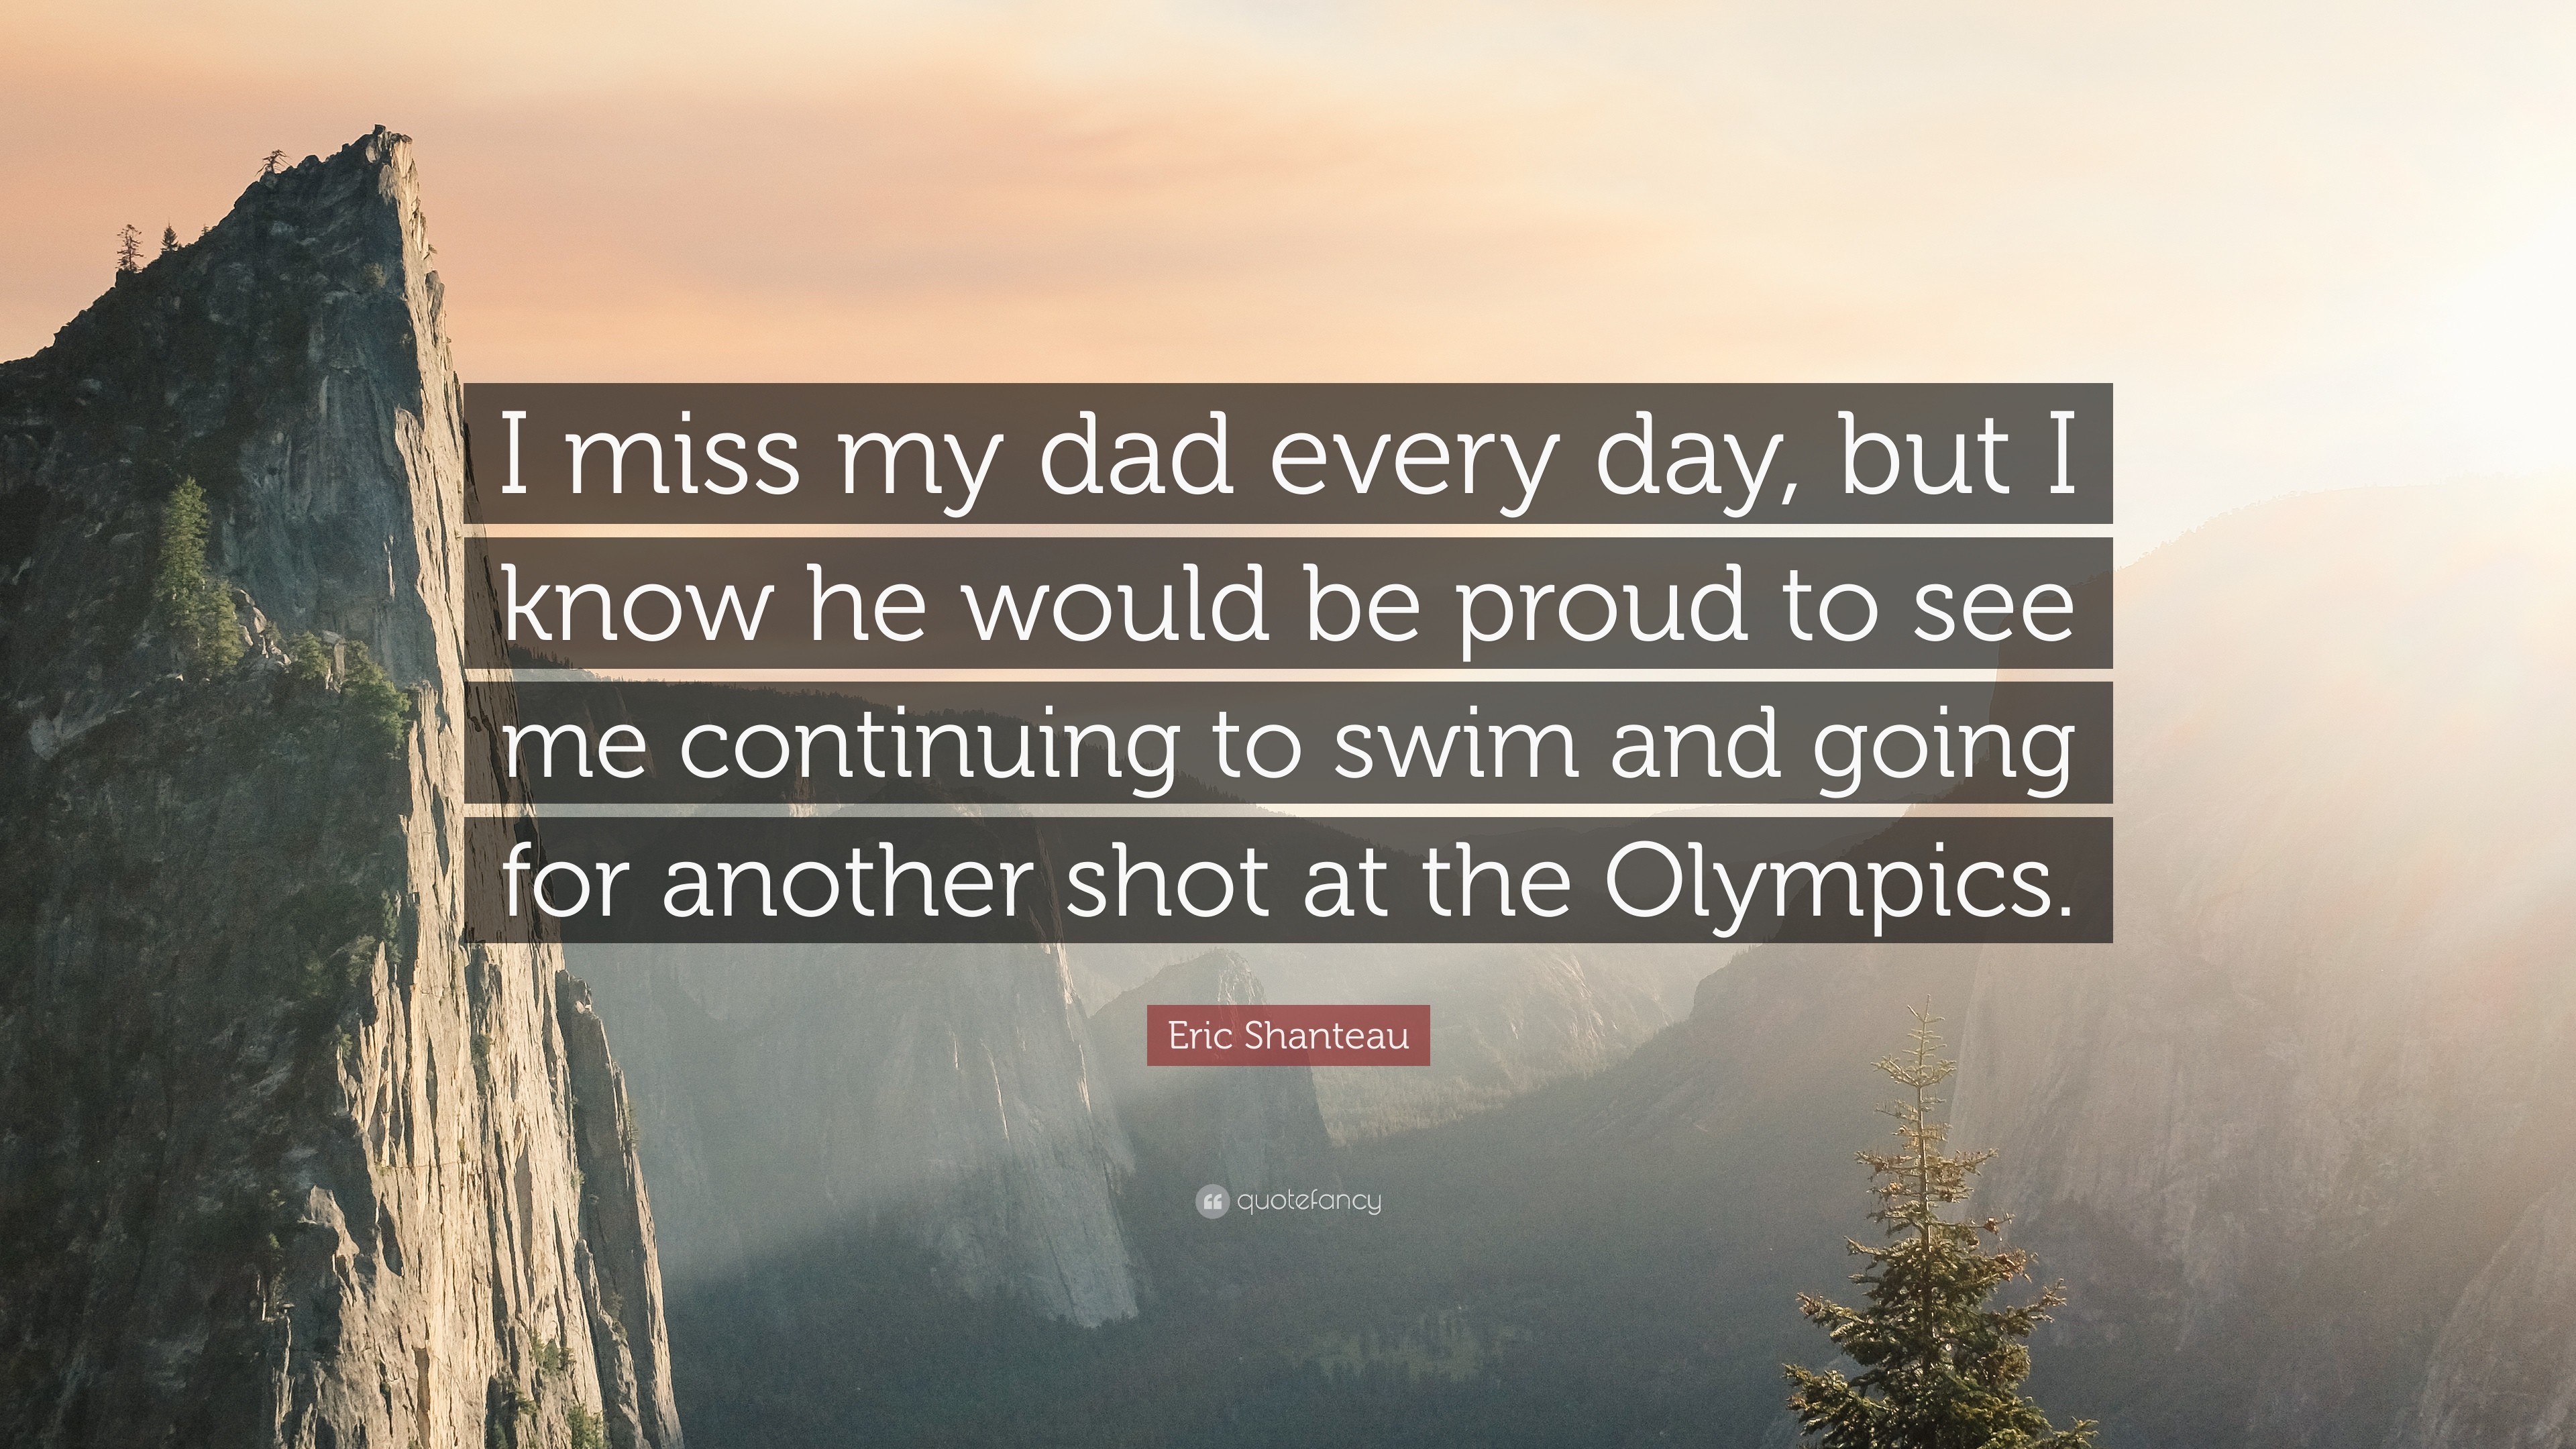 3840x2160 7 wallpapers. Eric Shanteau Quote: “I miss my dad ...